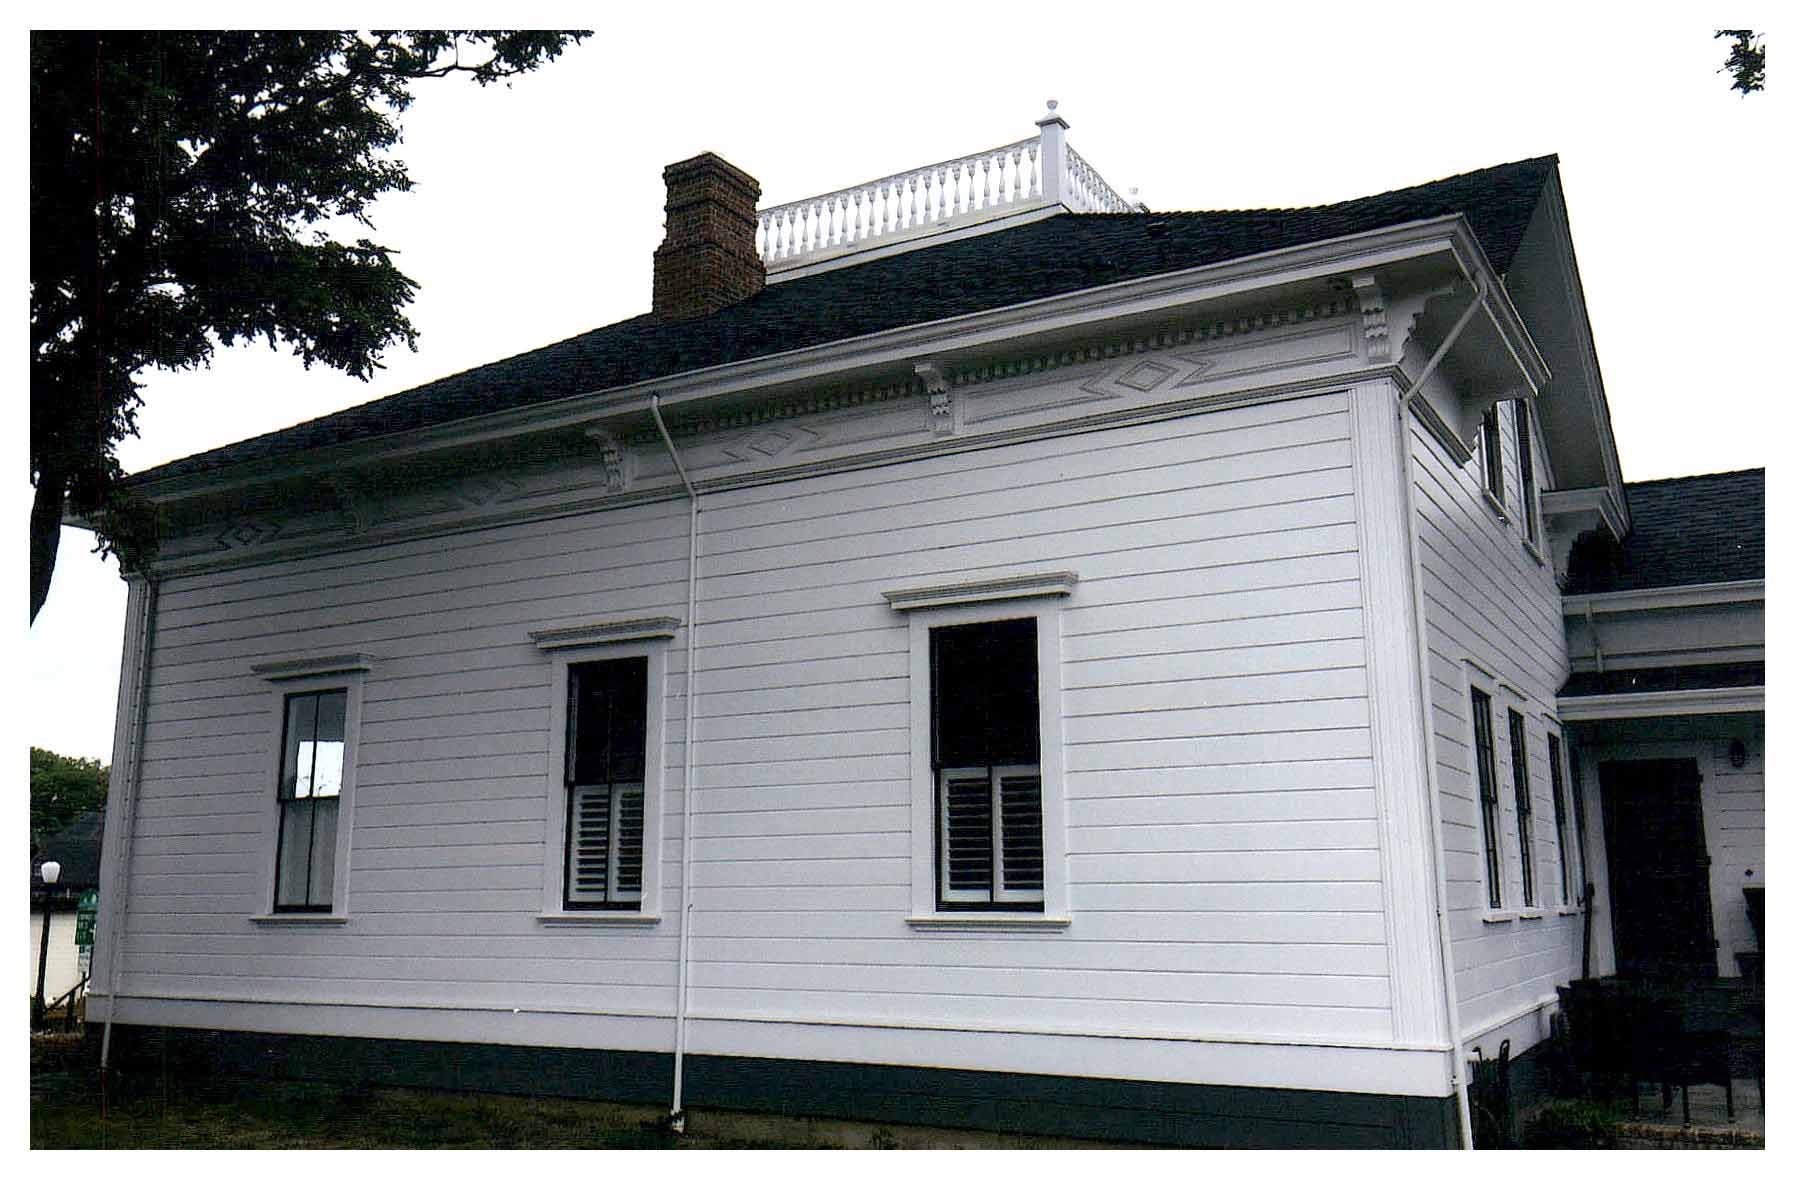 After: side facade with new white paint. Reconstructed ridge railing is visible at roof.